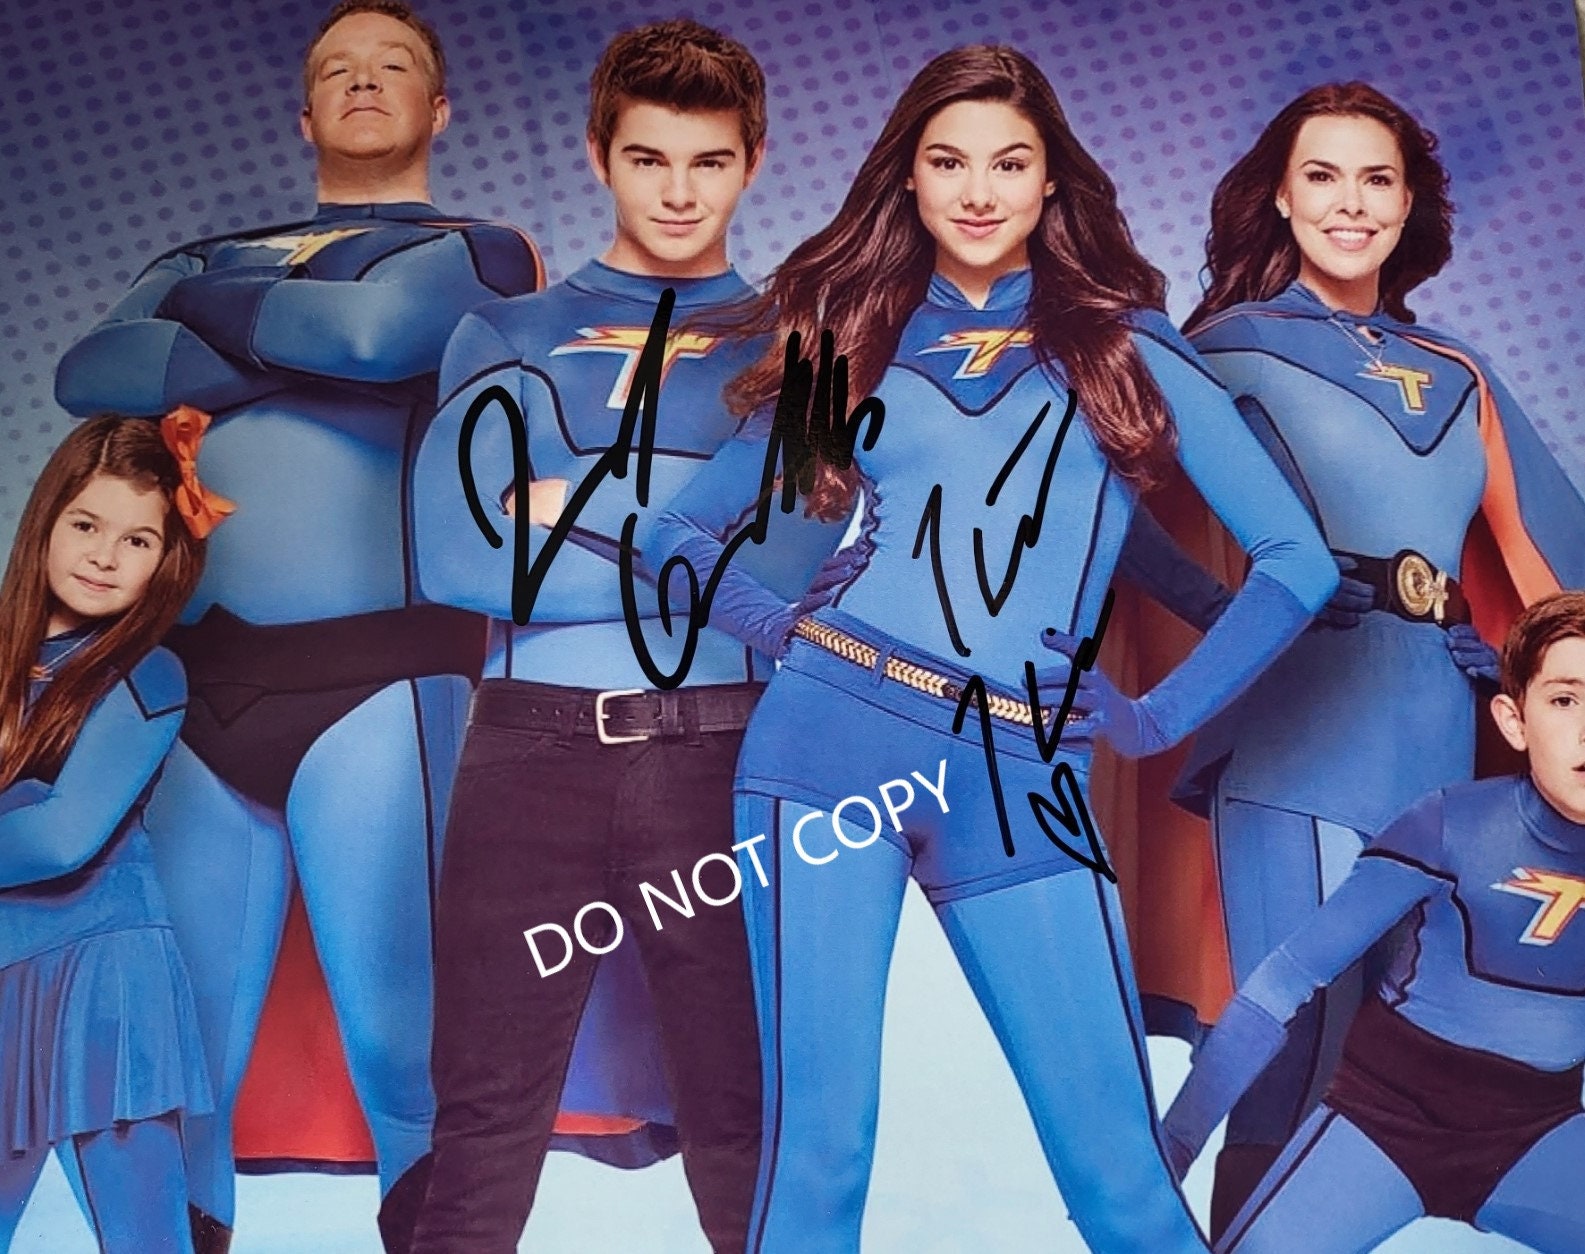 The Thundermans Costume and Cosplay